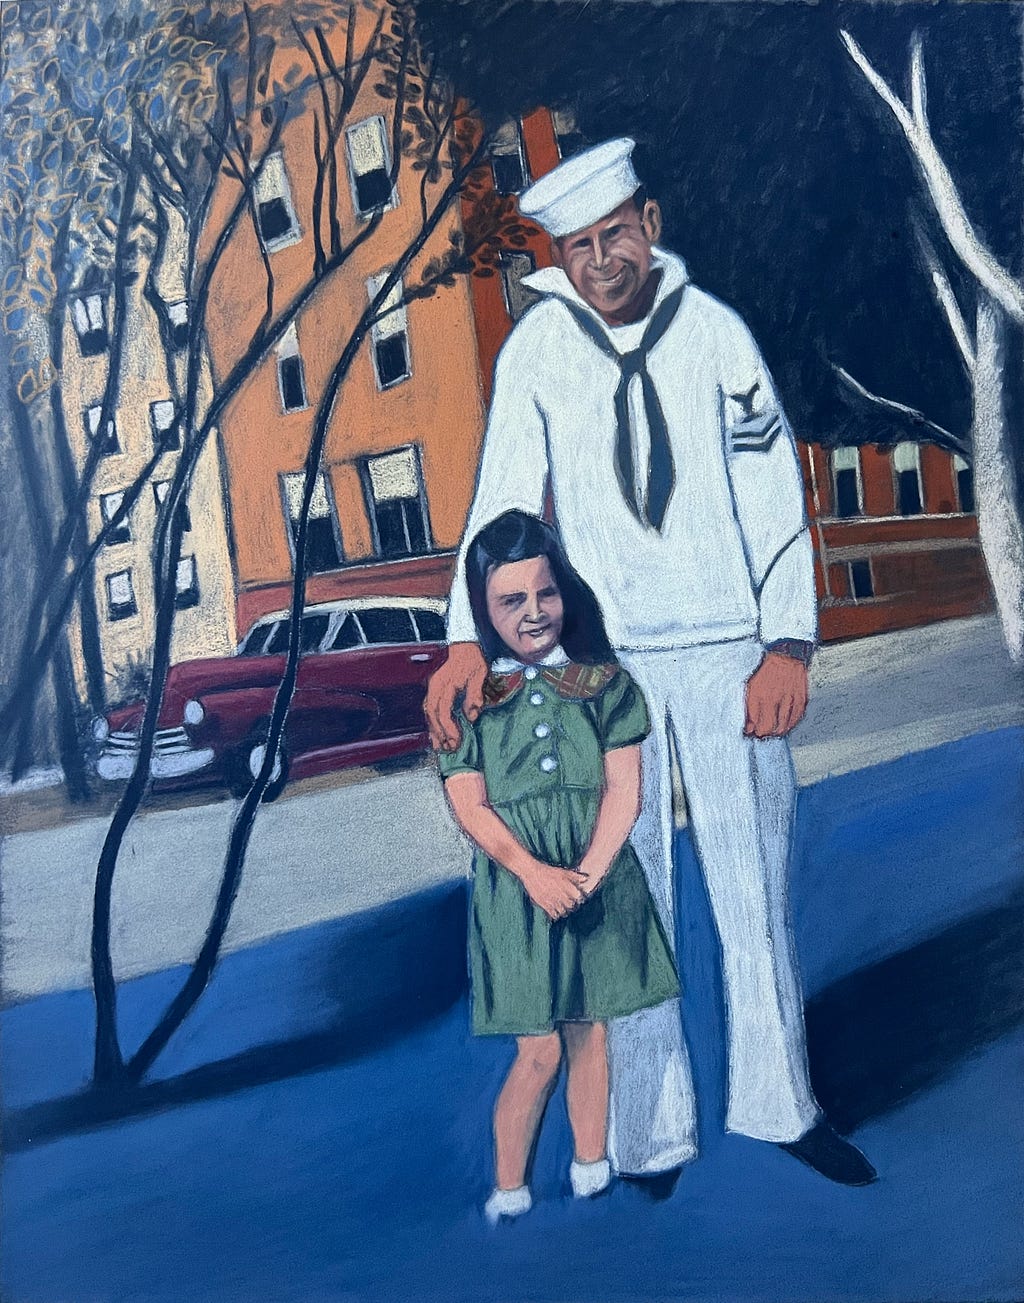 A pastel painting of the author’s mom and grandfather, painted by the author, Sydney Longfellow